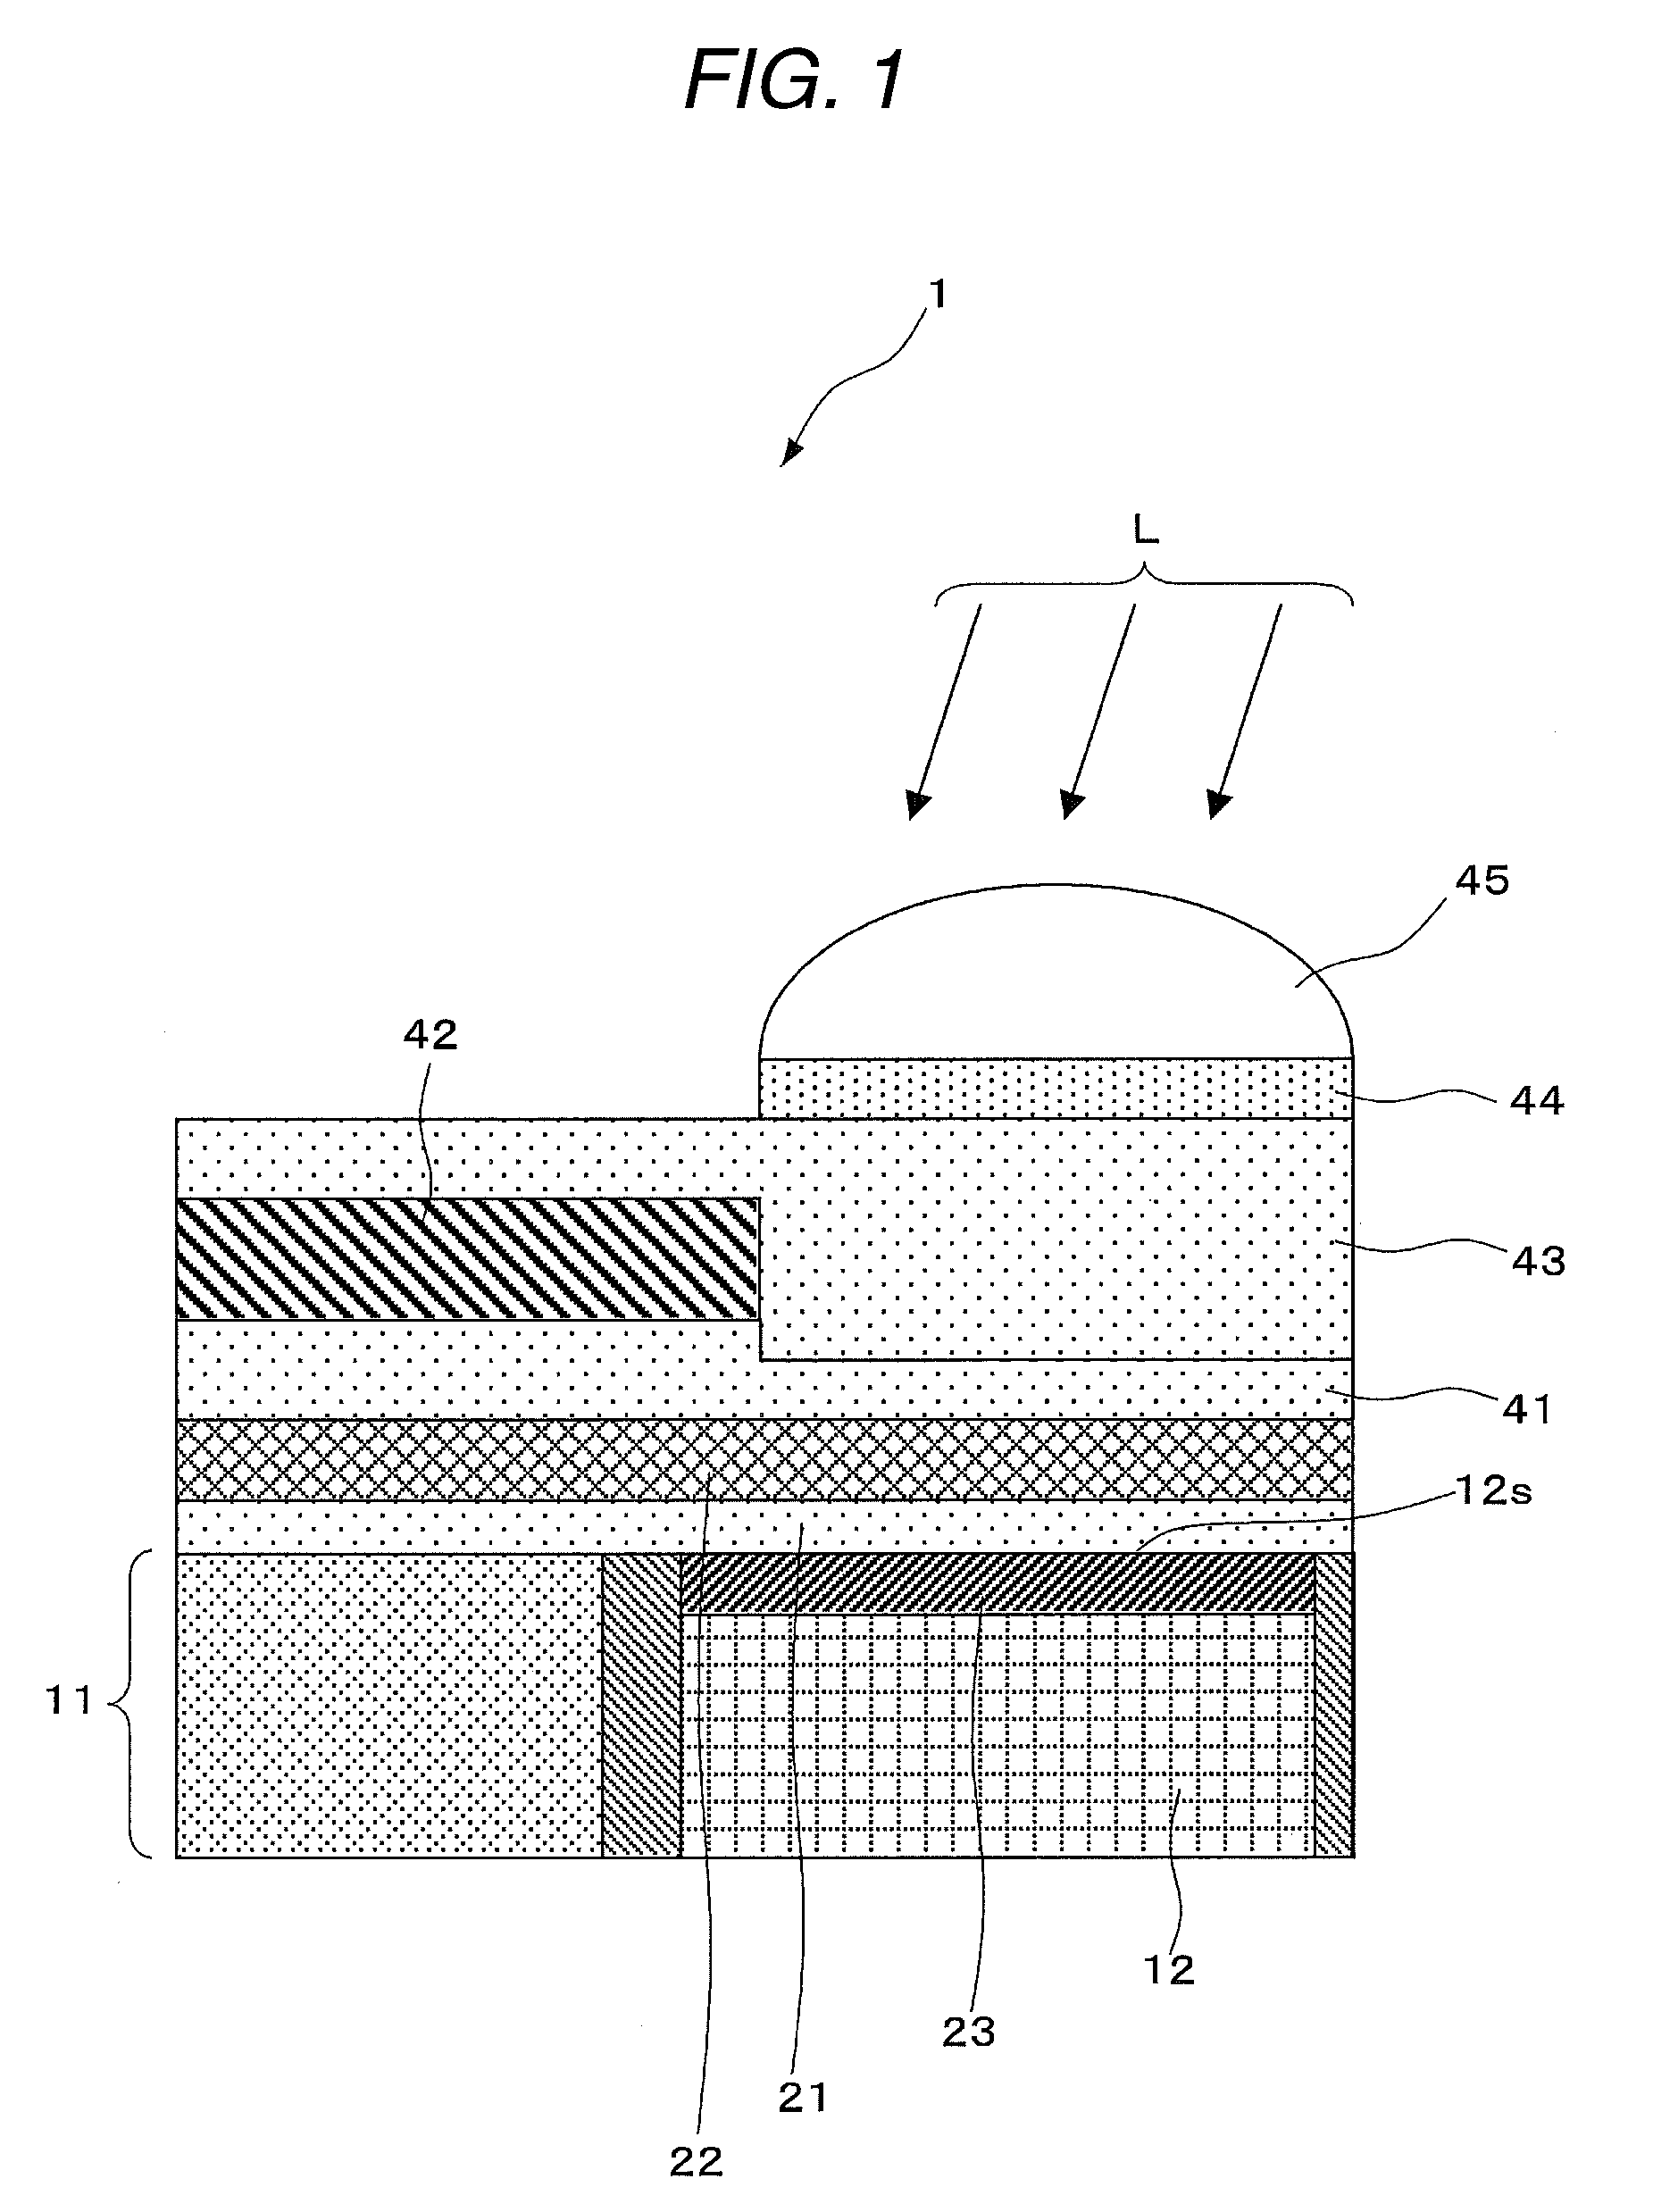 Solid-state imaging device, manufacturing method for the same, and imaging apparatus